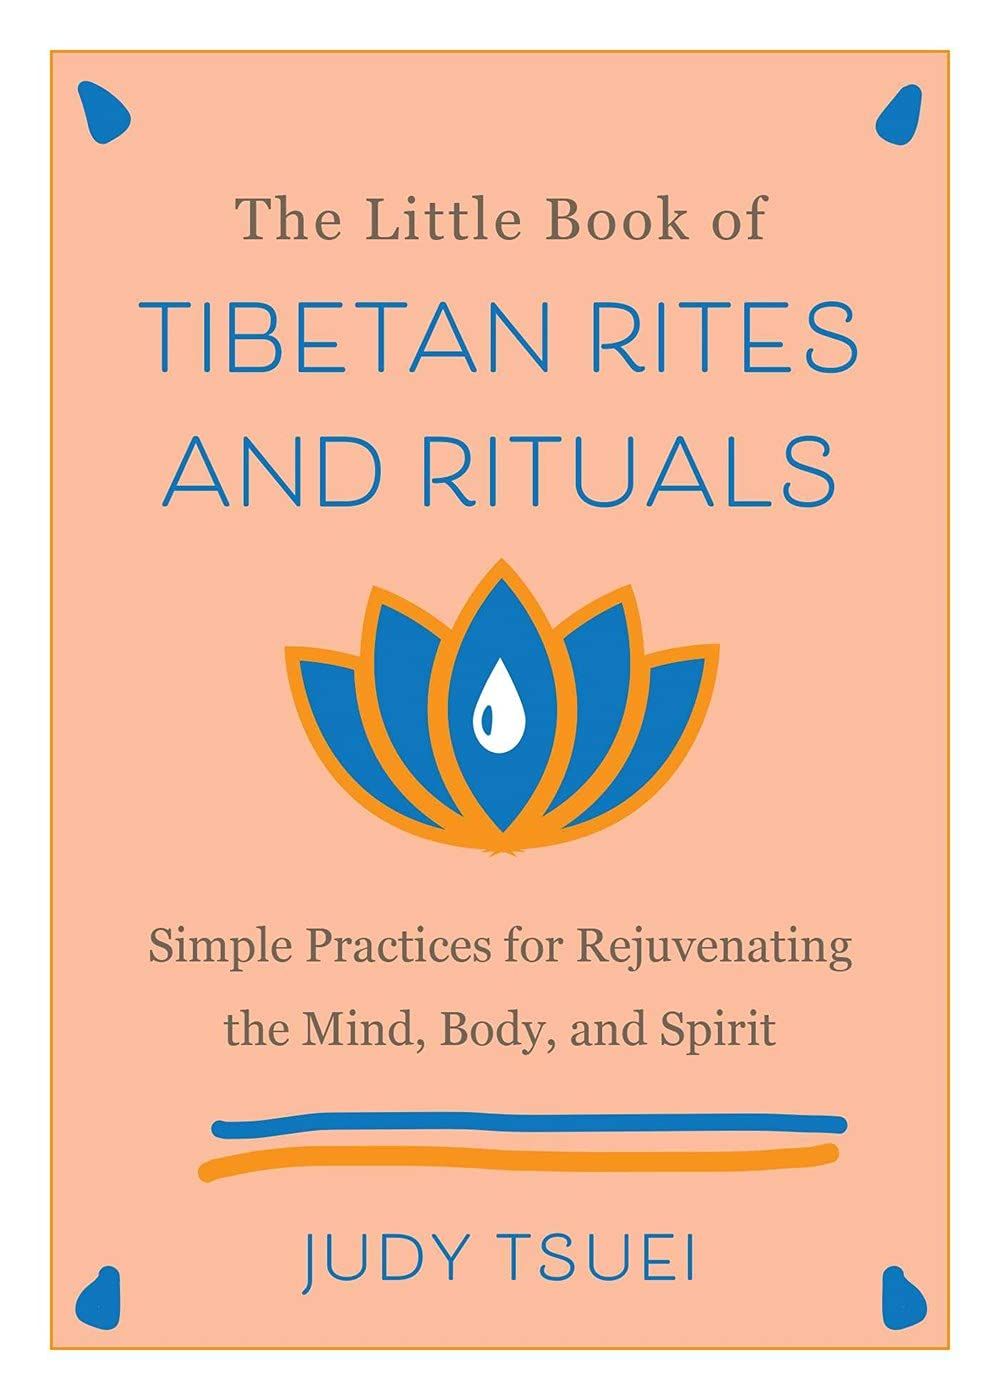 The Little Book Of Tibetan Rites And Rituals : Simple Practices for Rejuvenating the Mind, Body, and Spirit